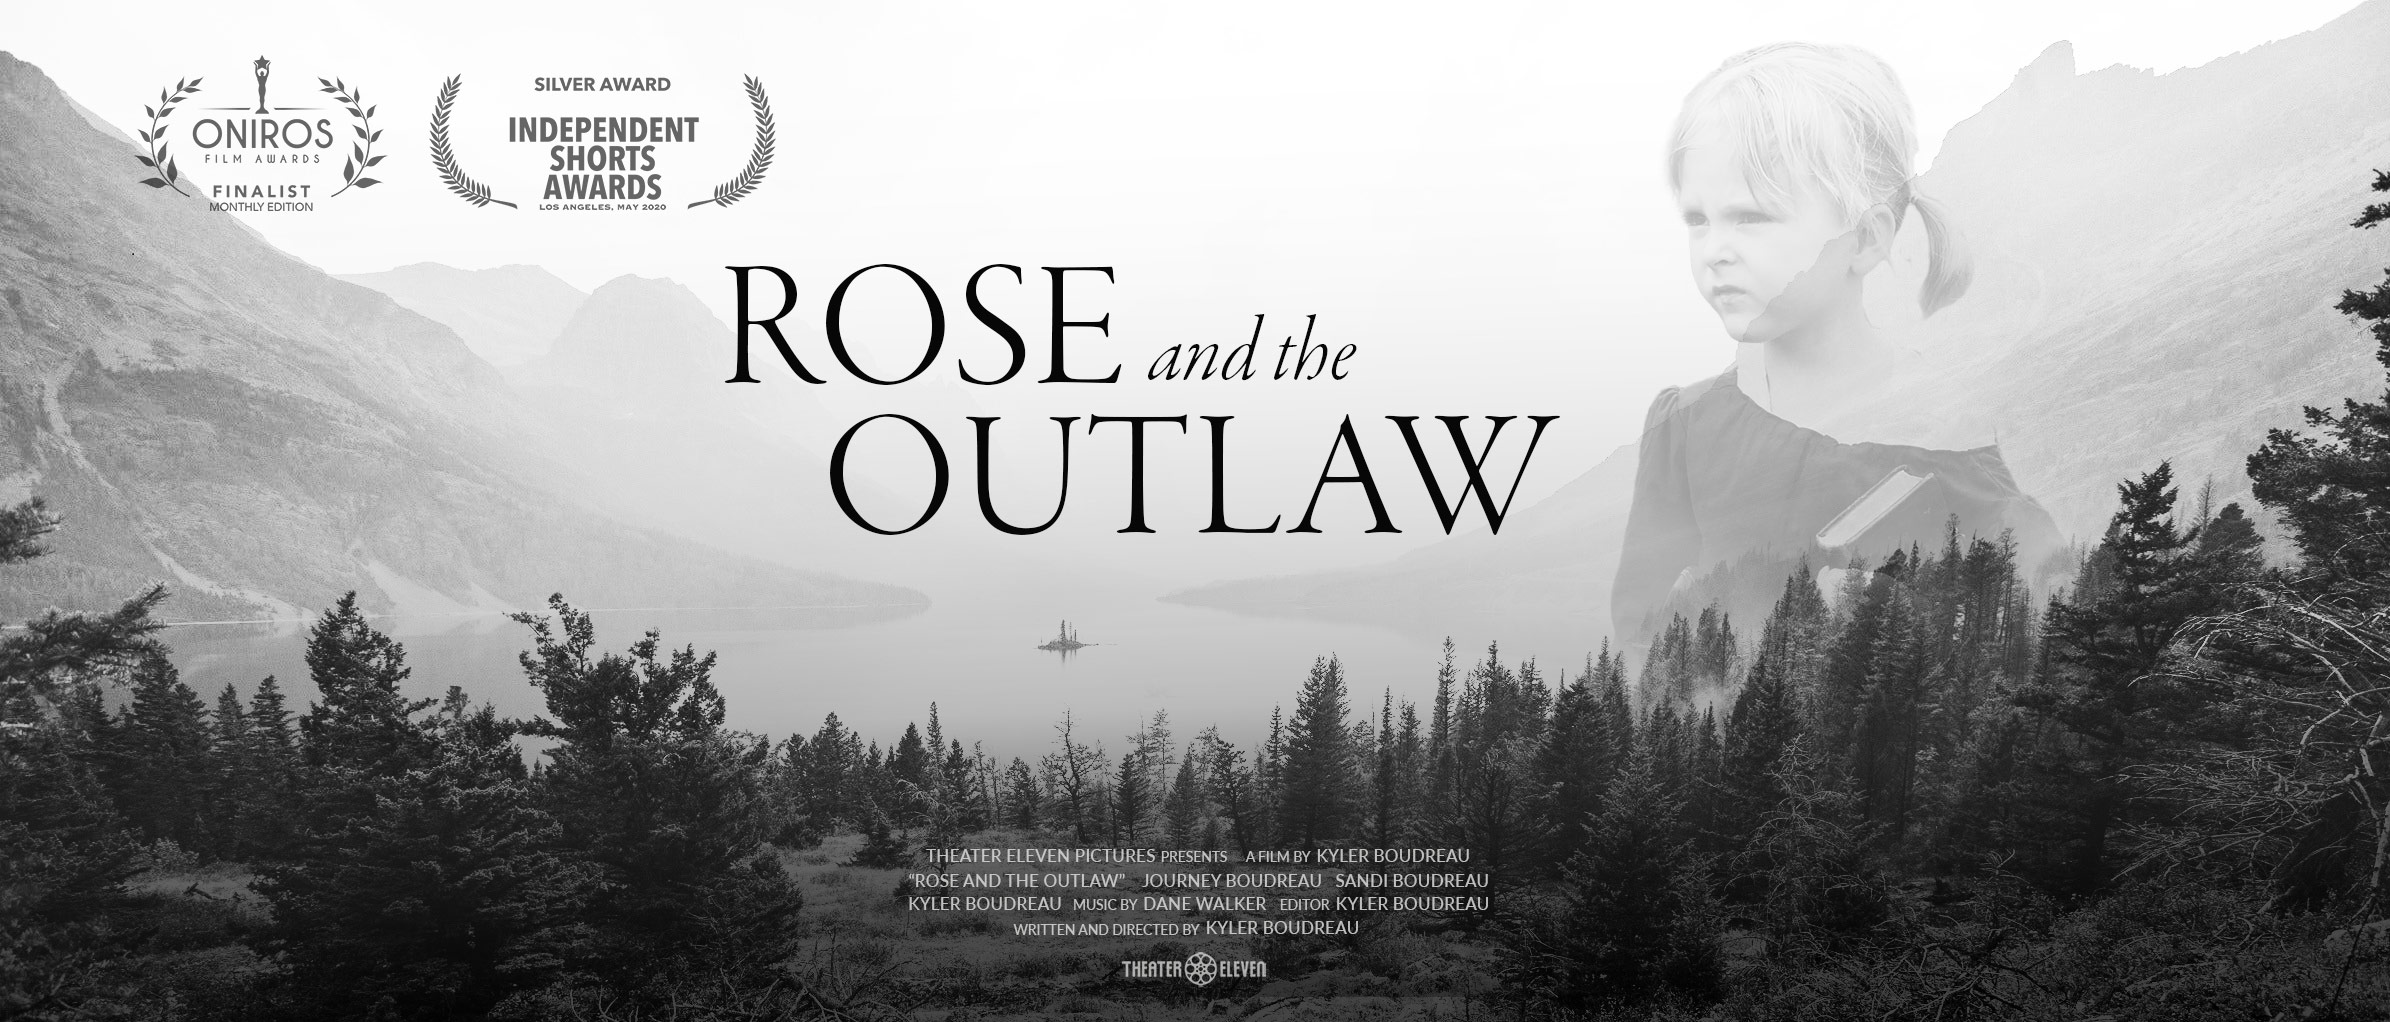 Rose and the Outlaw